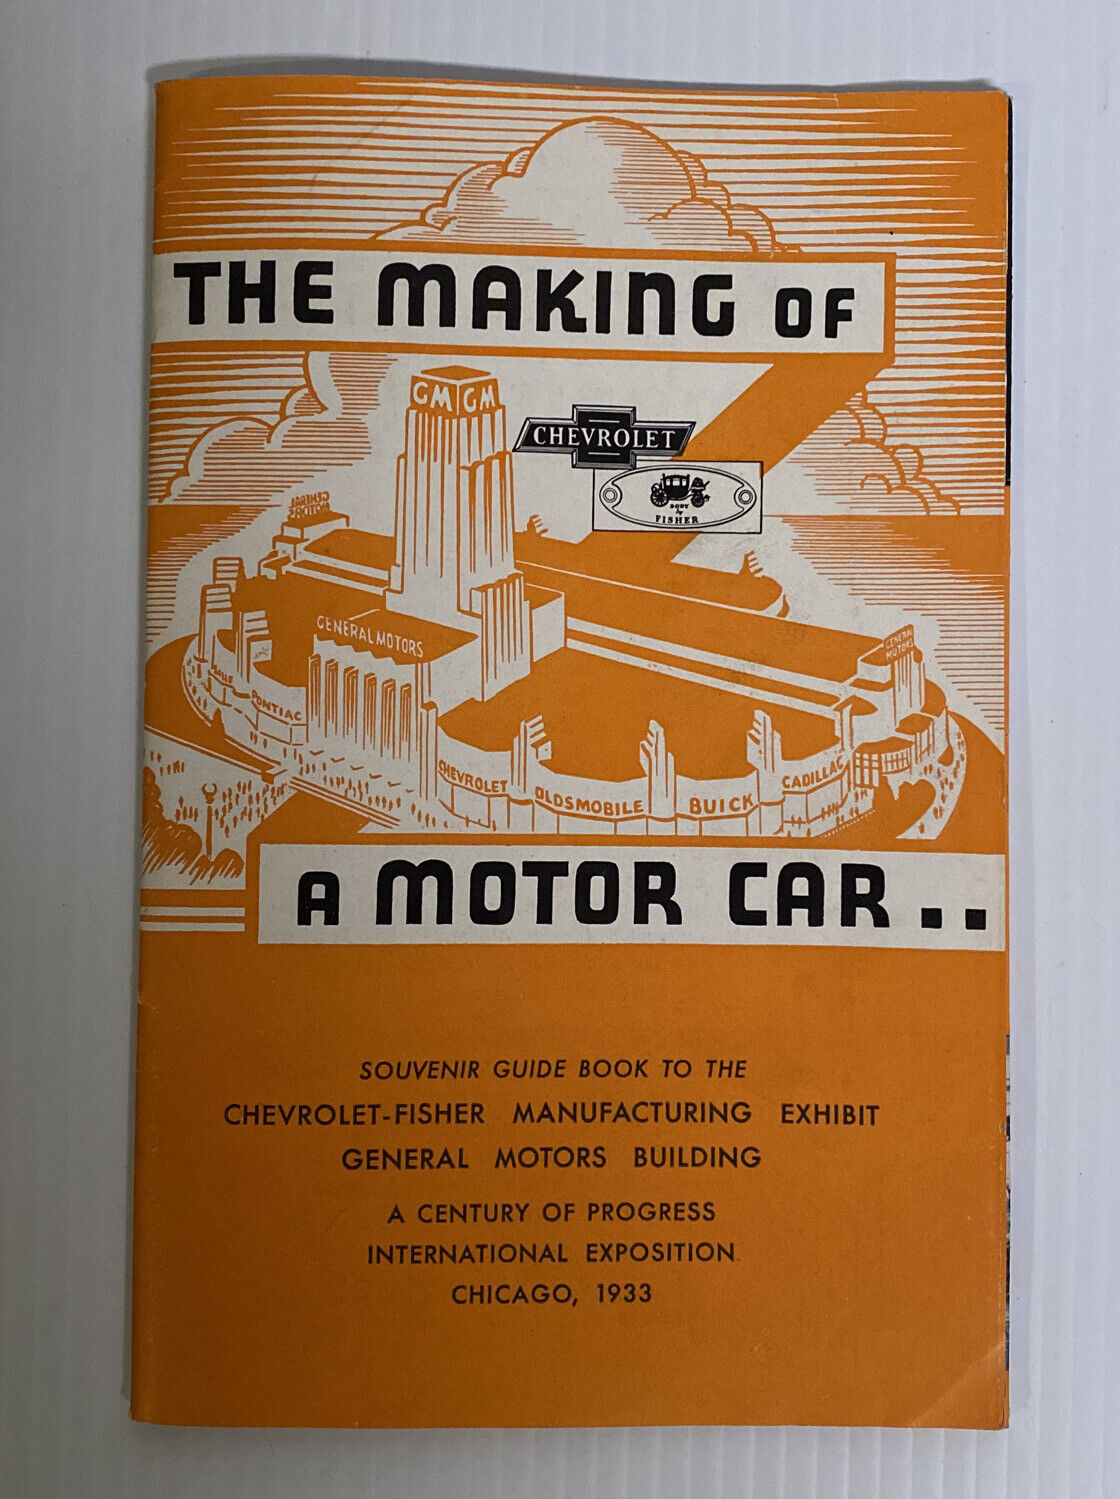 The Making of a Motor Car Souvenir Chevrolet-Fisher World's Fair Chicago 1933